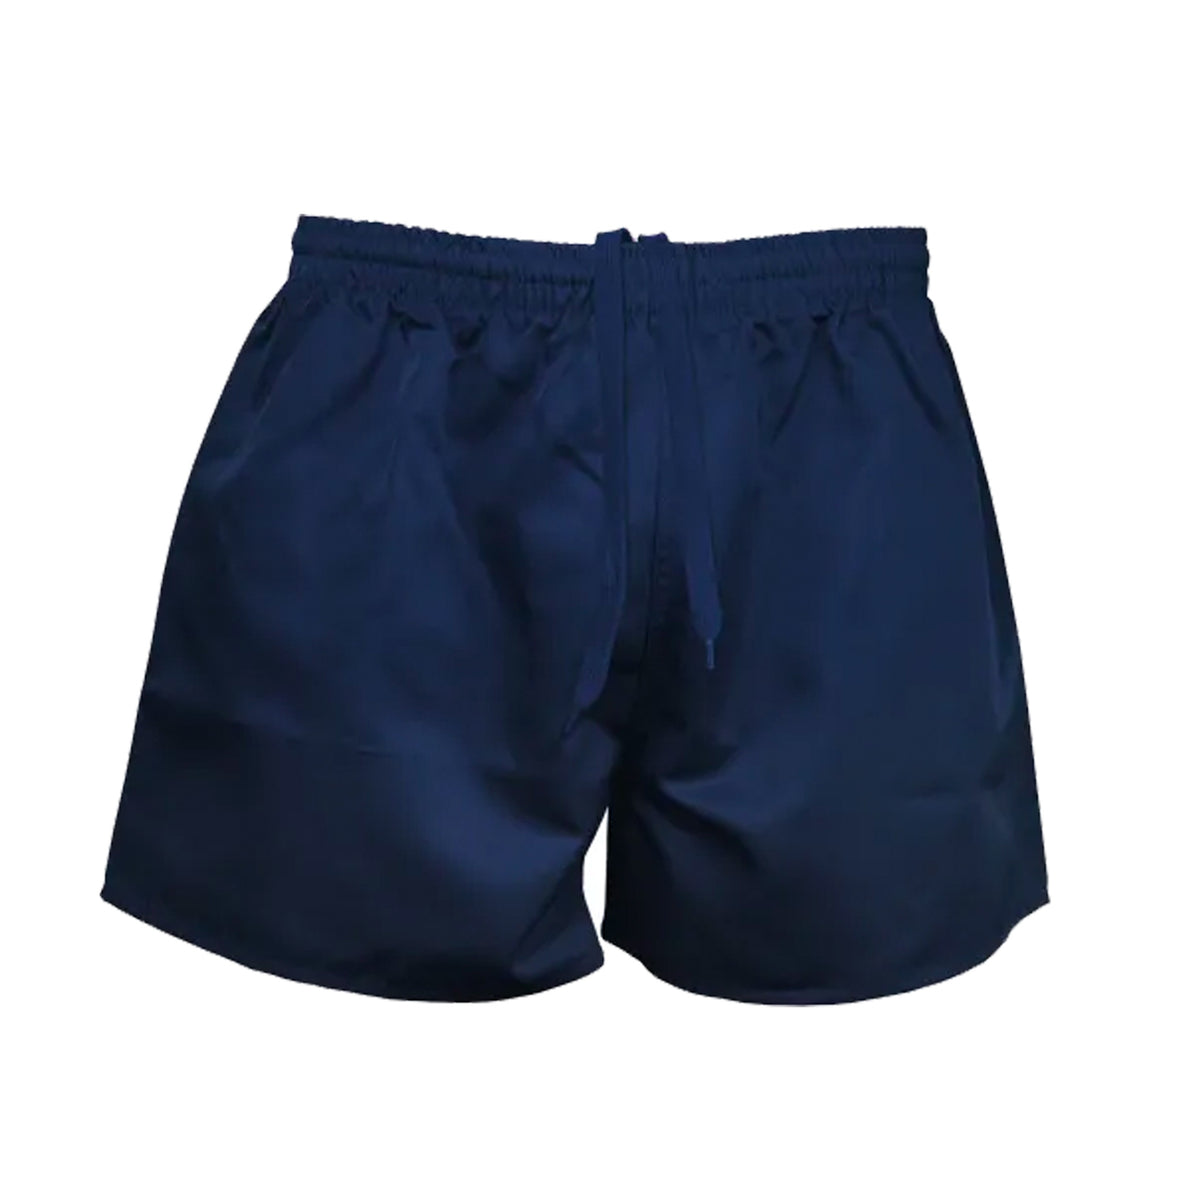 aussie pacific rugby mens shorts in navy